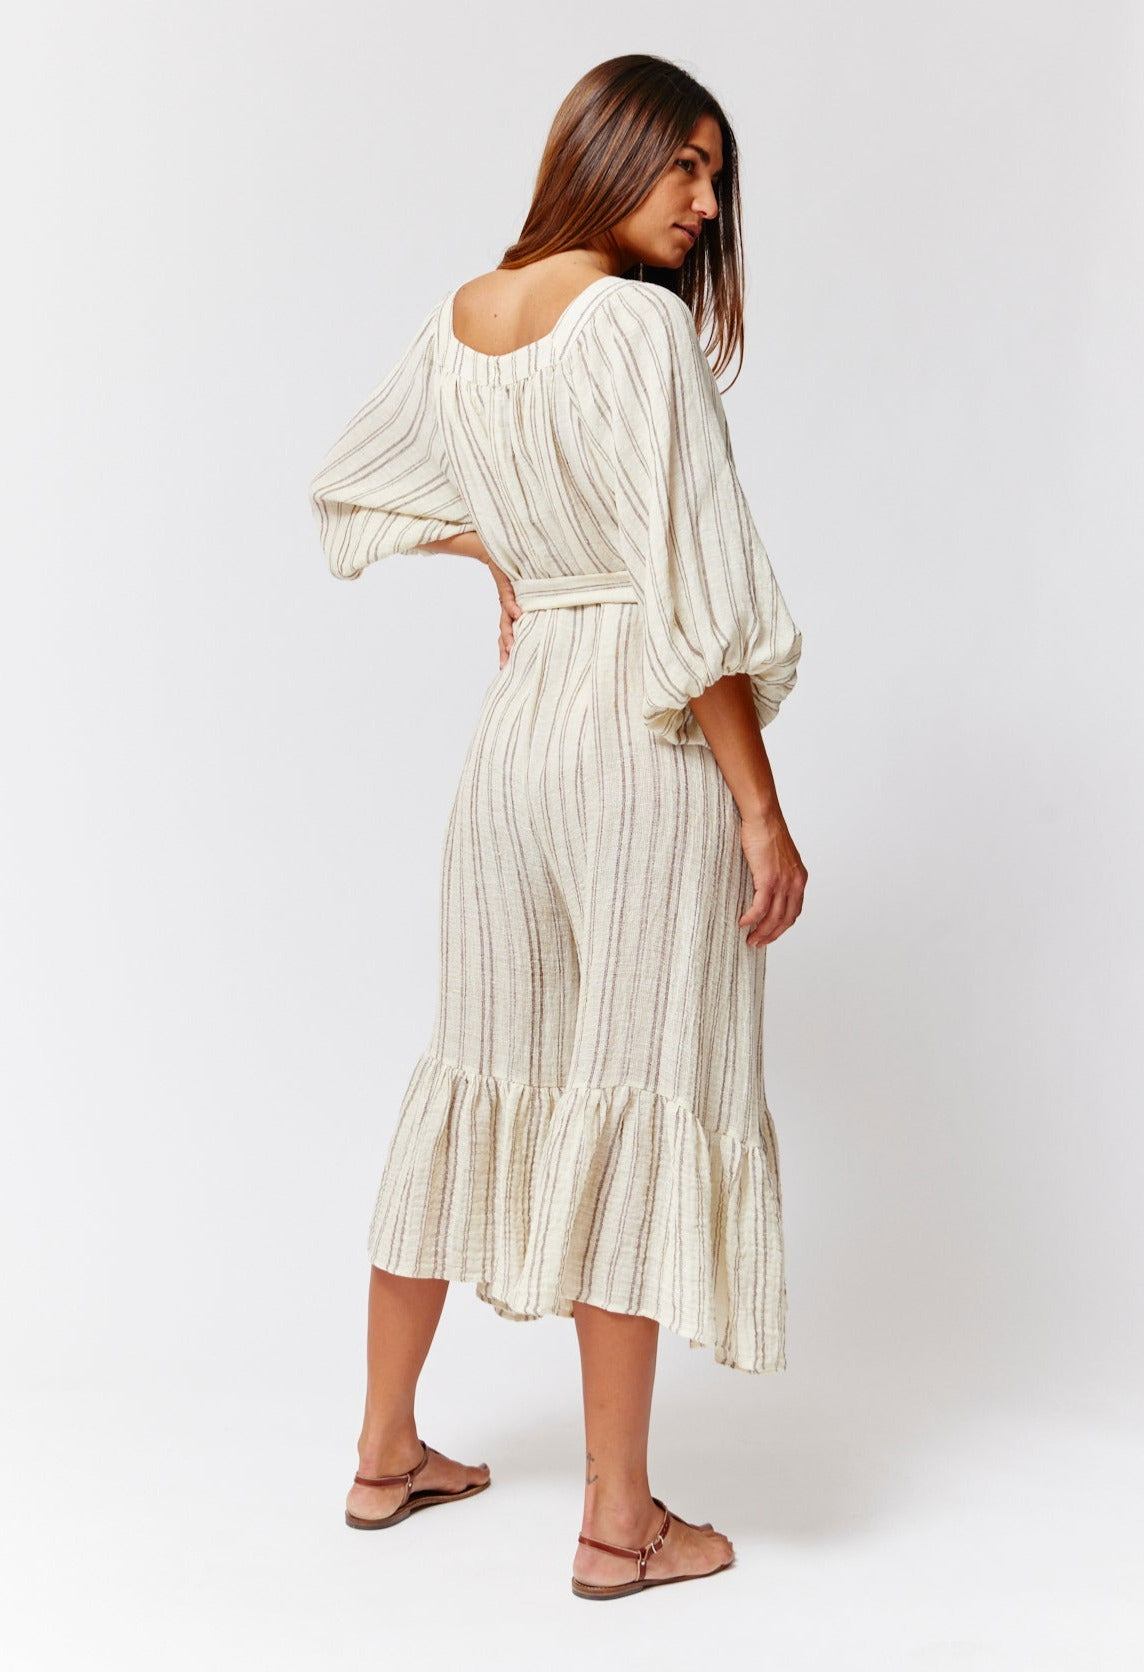 THE LAURE JUMPSUIT in NATURAL & BROWN STRIPED CHIOS GAUZE